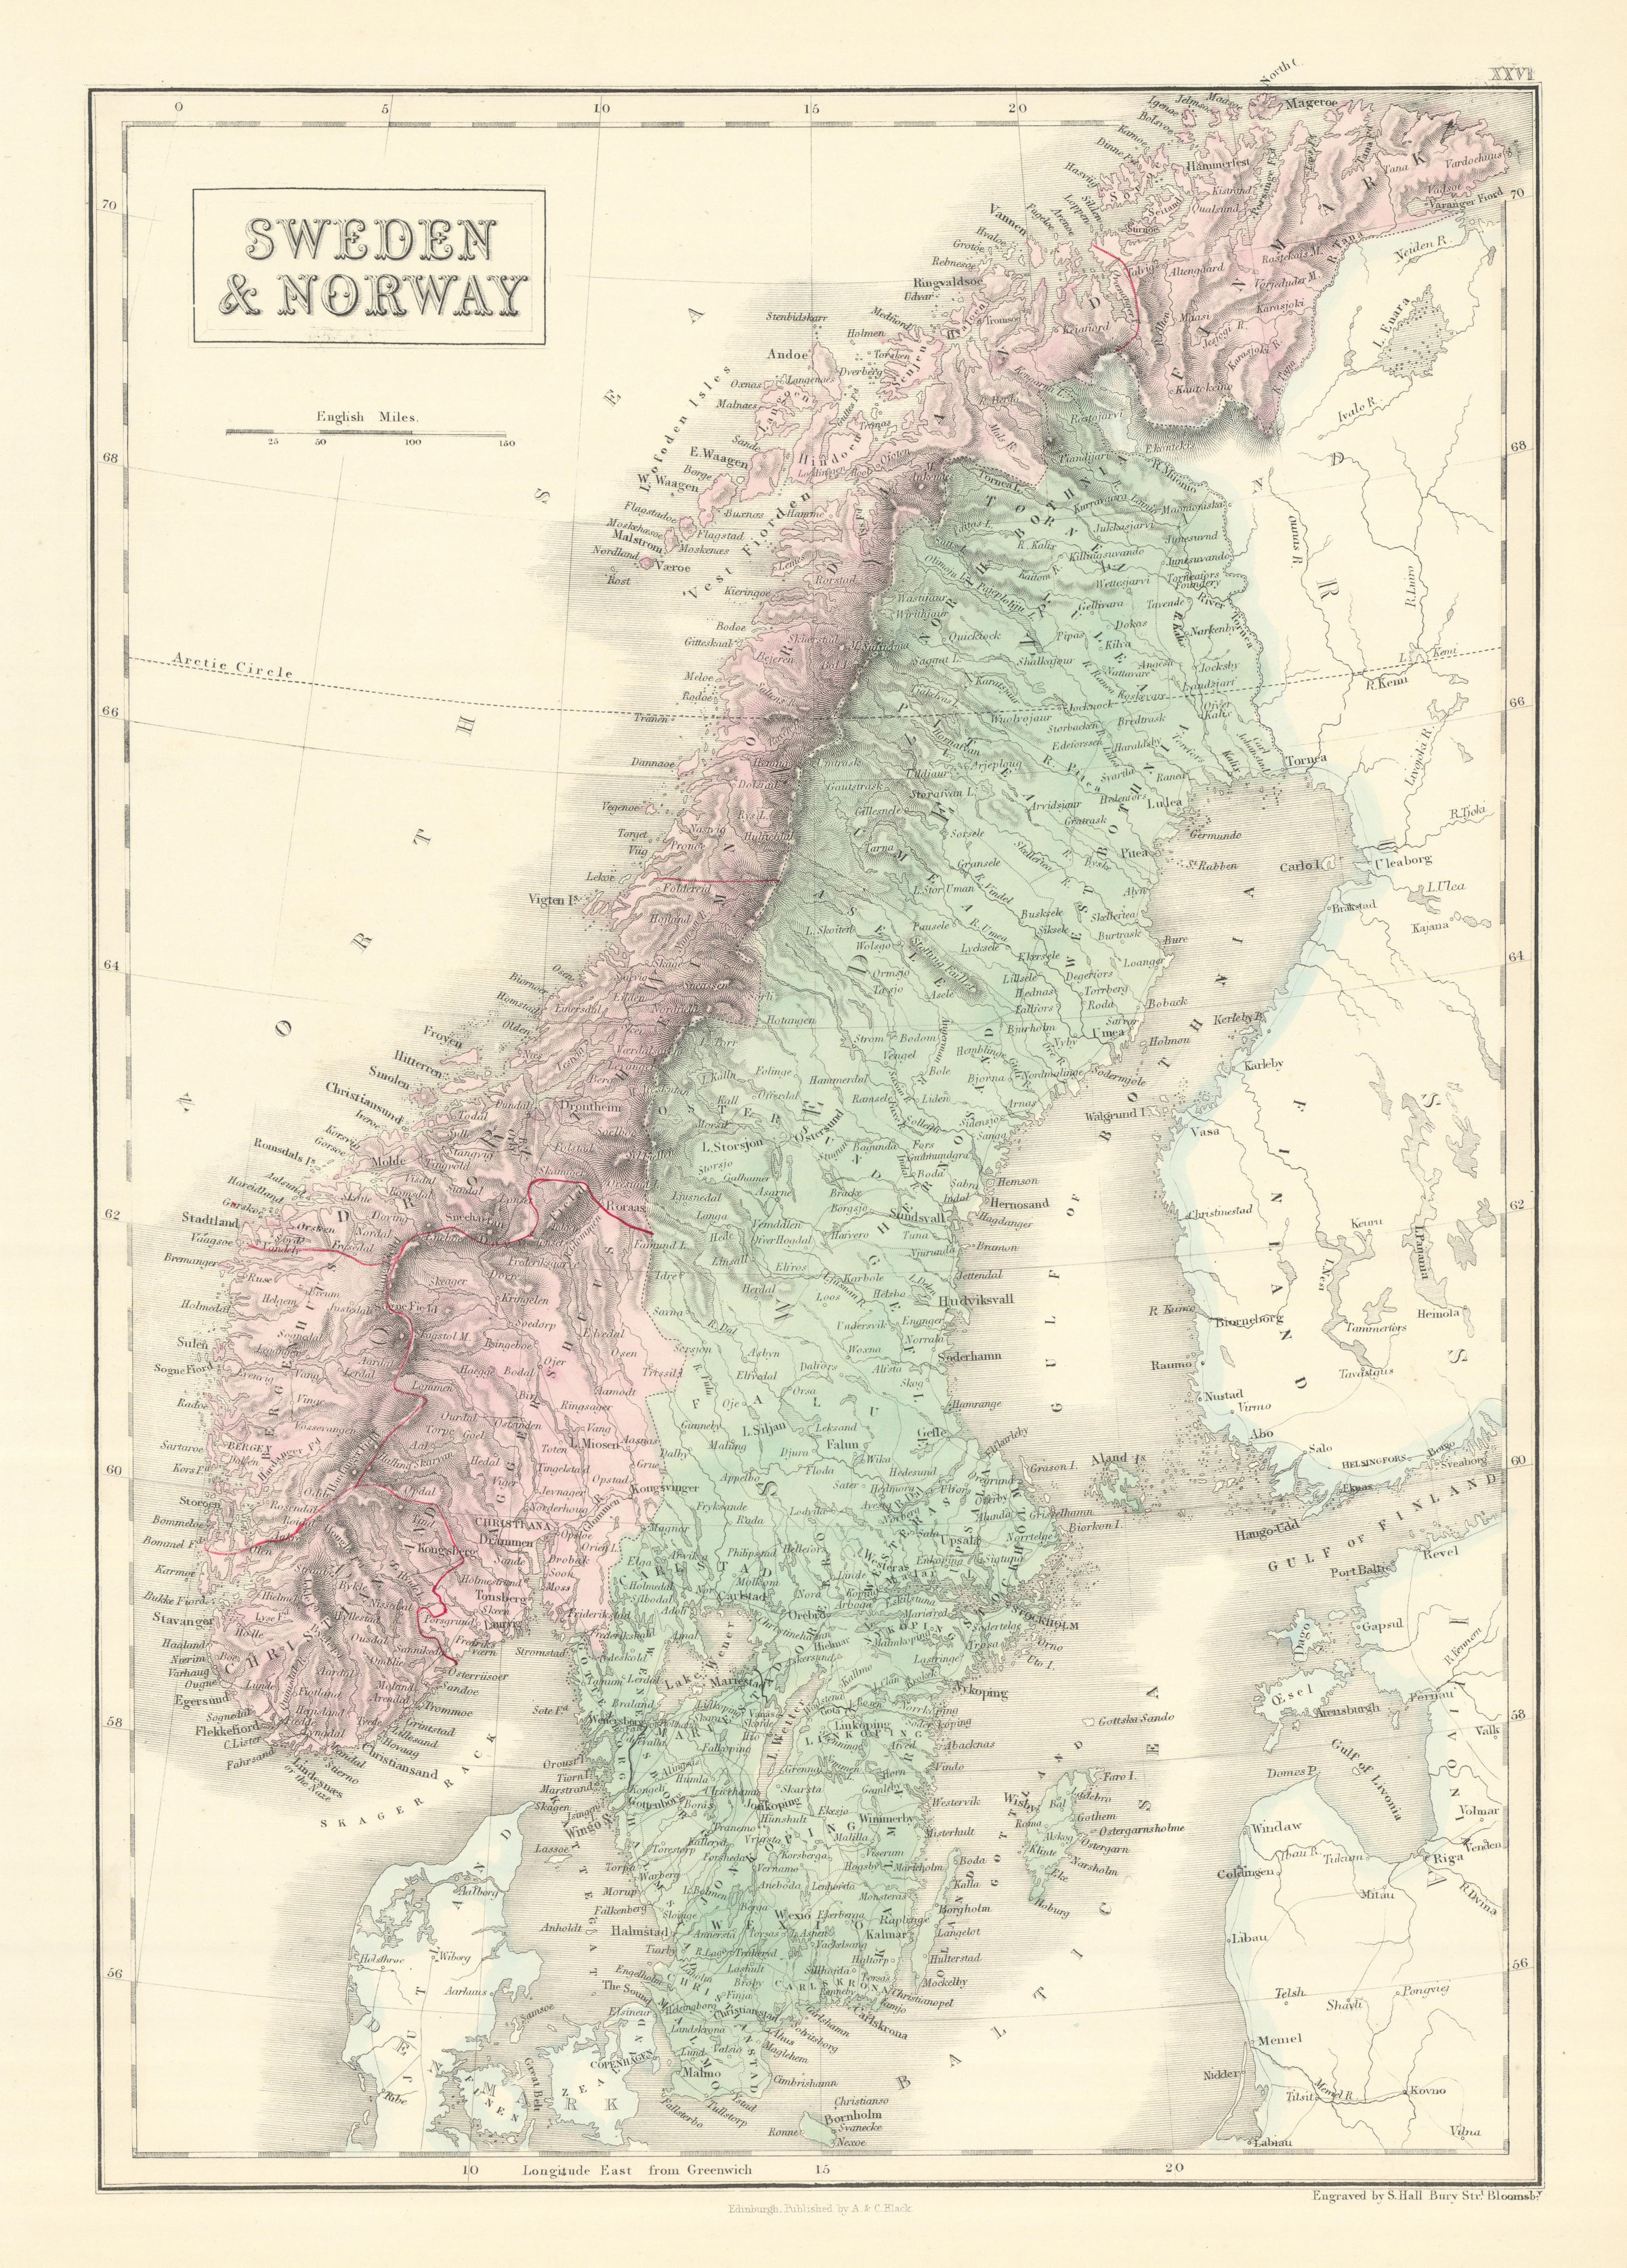 Associate Product Sweden & Norway. Scandinavia showing provinces. SIDNEY HALL 1854 old map